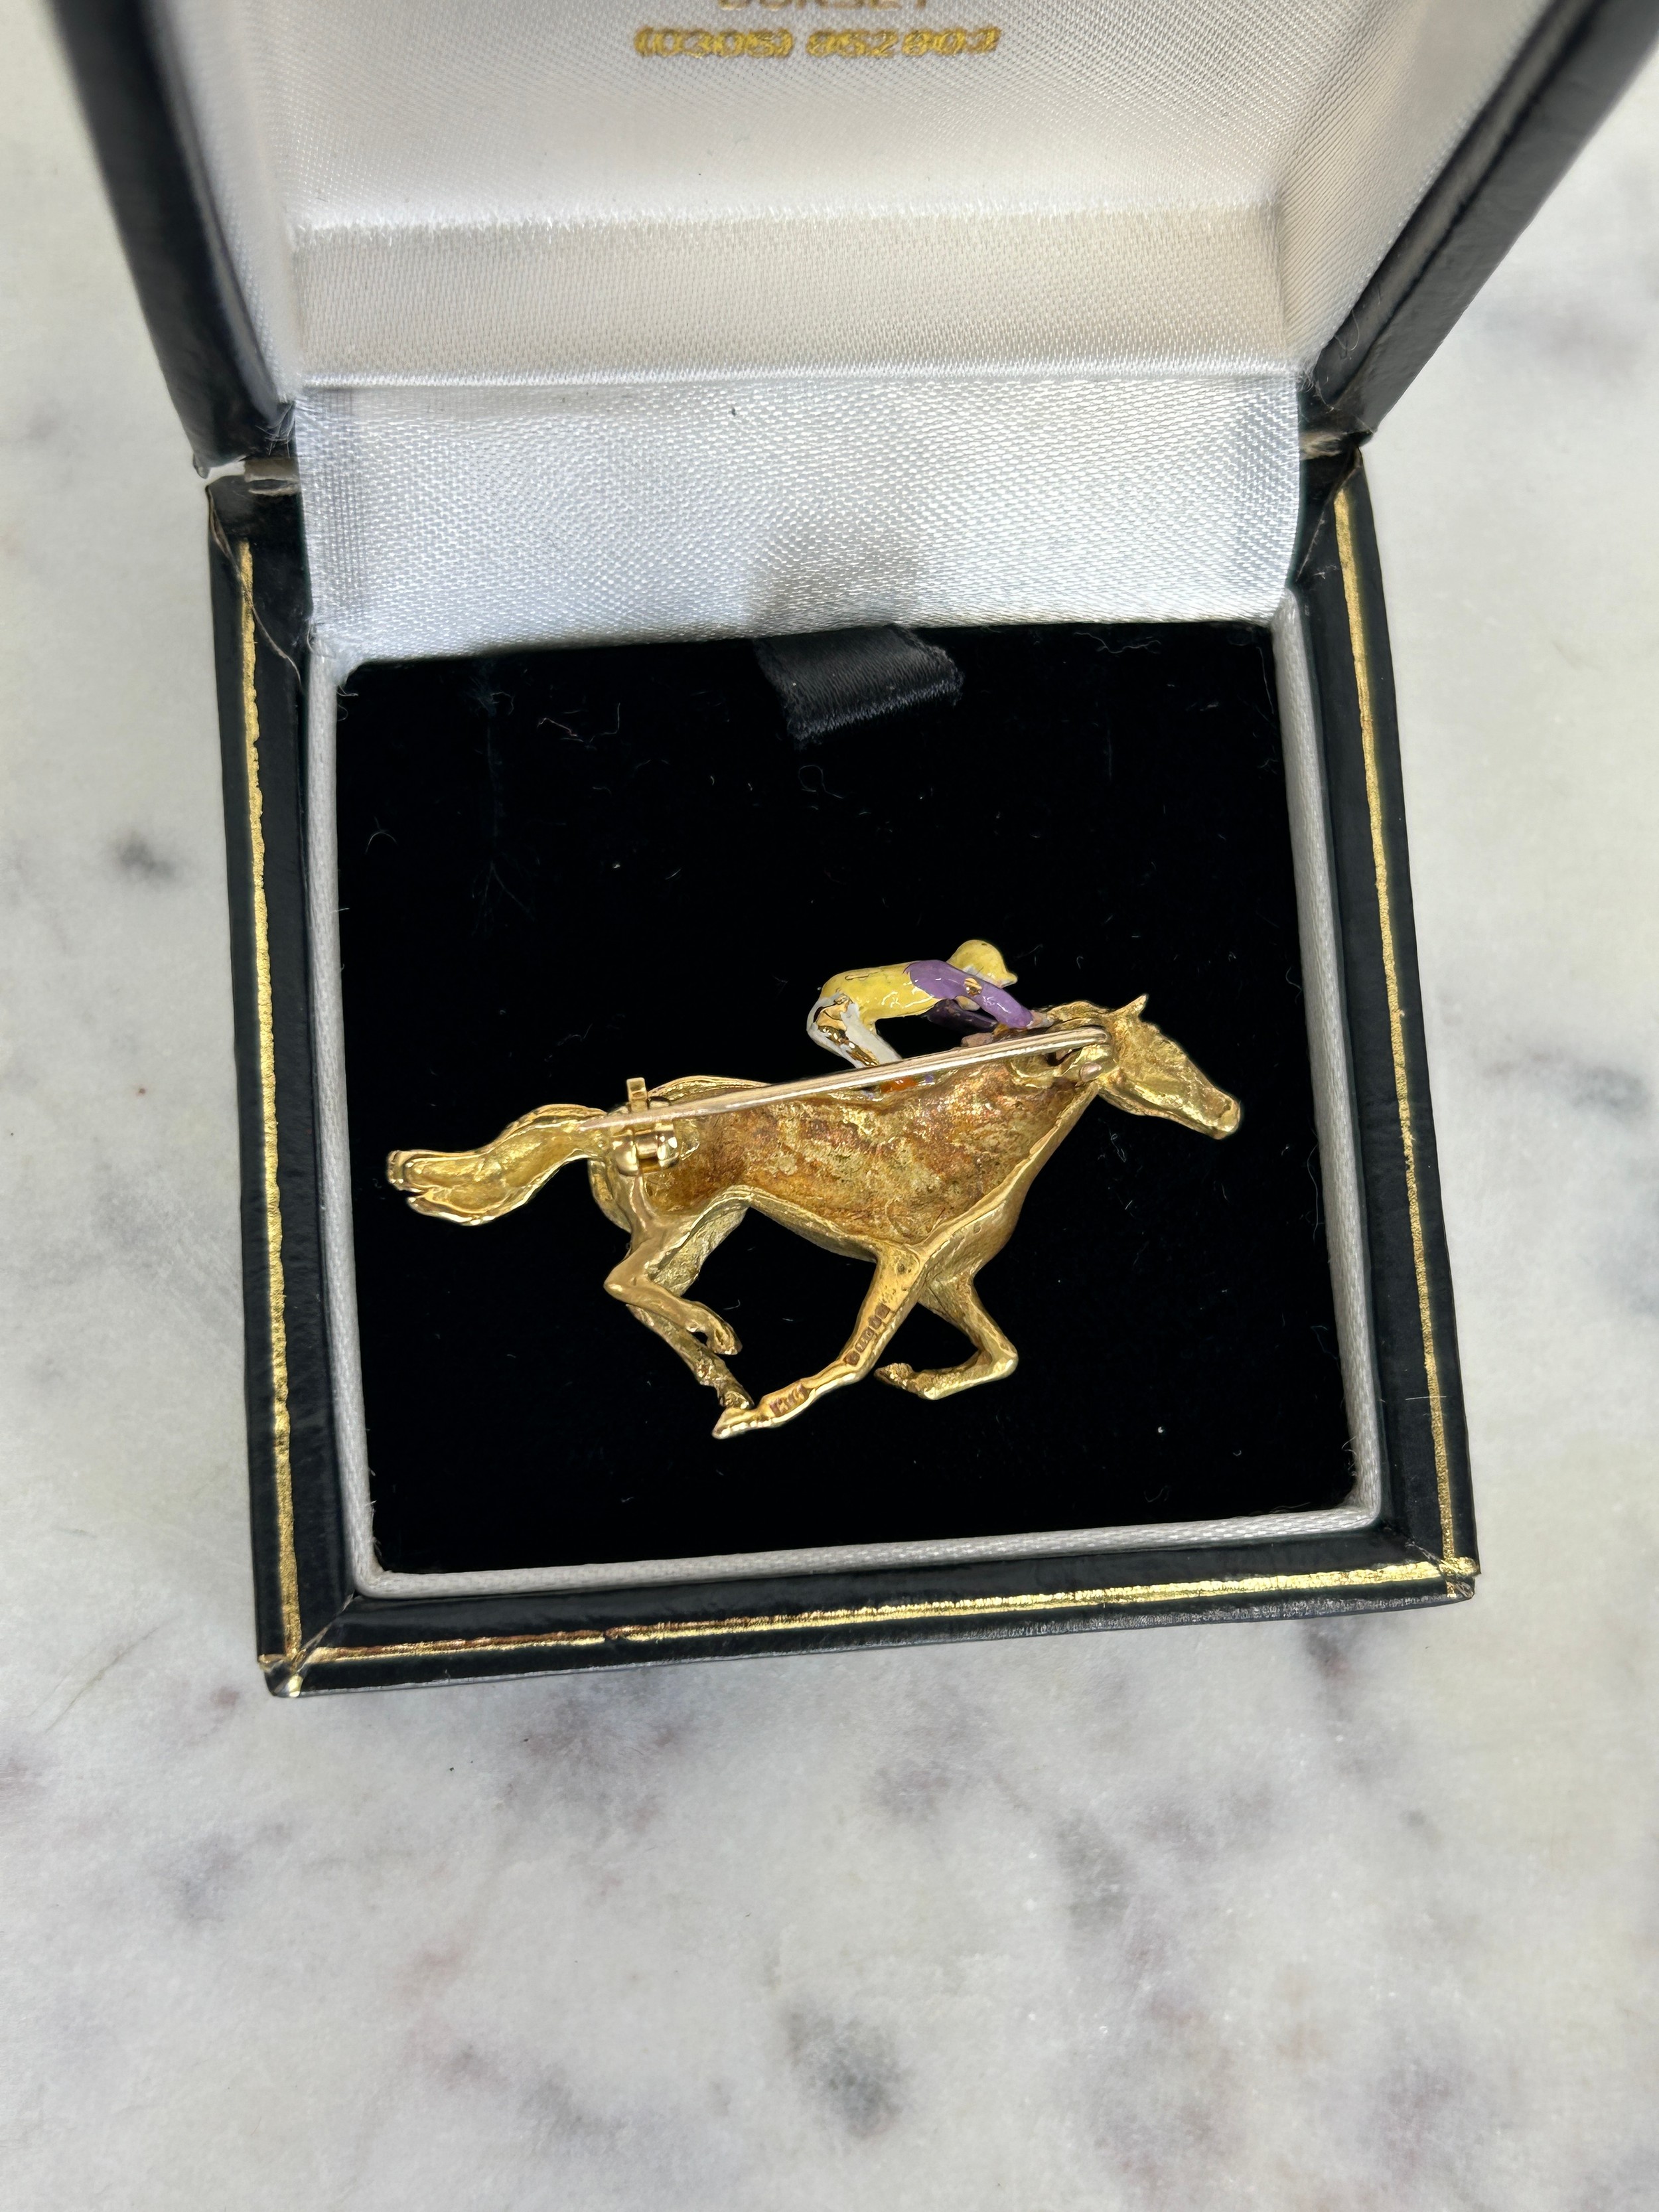 AN 18CT GOLD HORSE PIN RACING BROOCH WITH ENAMEL JOCKEY BY HARRIET GLEN, 10.5gms - Image 3 of 3